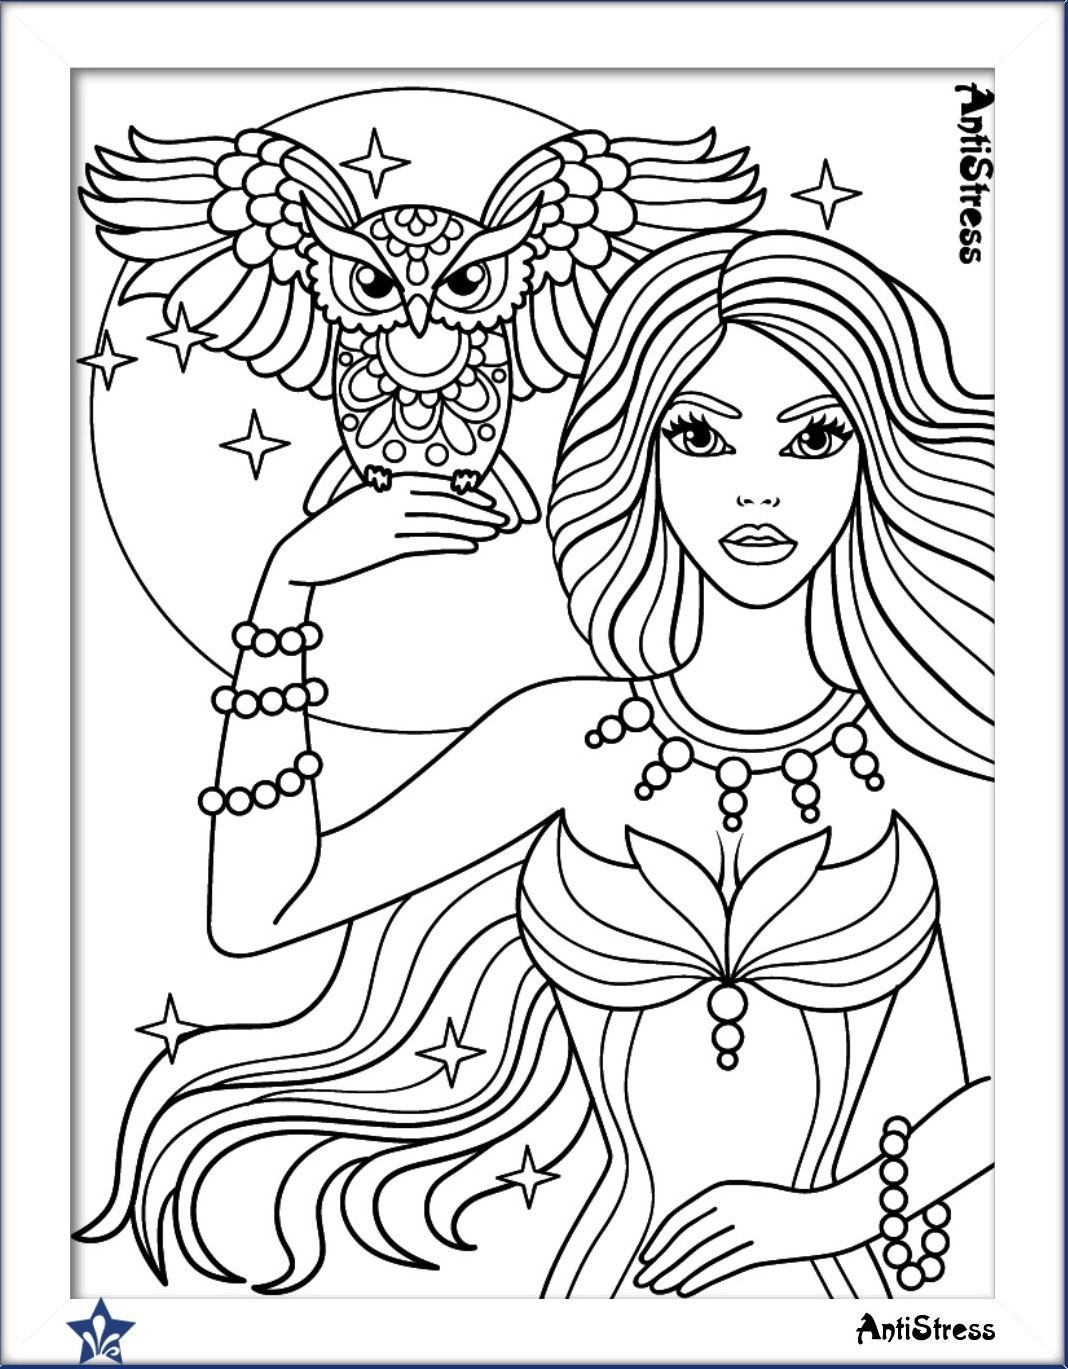 Girl Coloring Pages For Adults
 Owl and girl coloring page